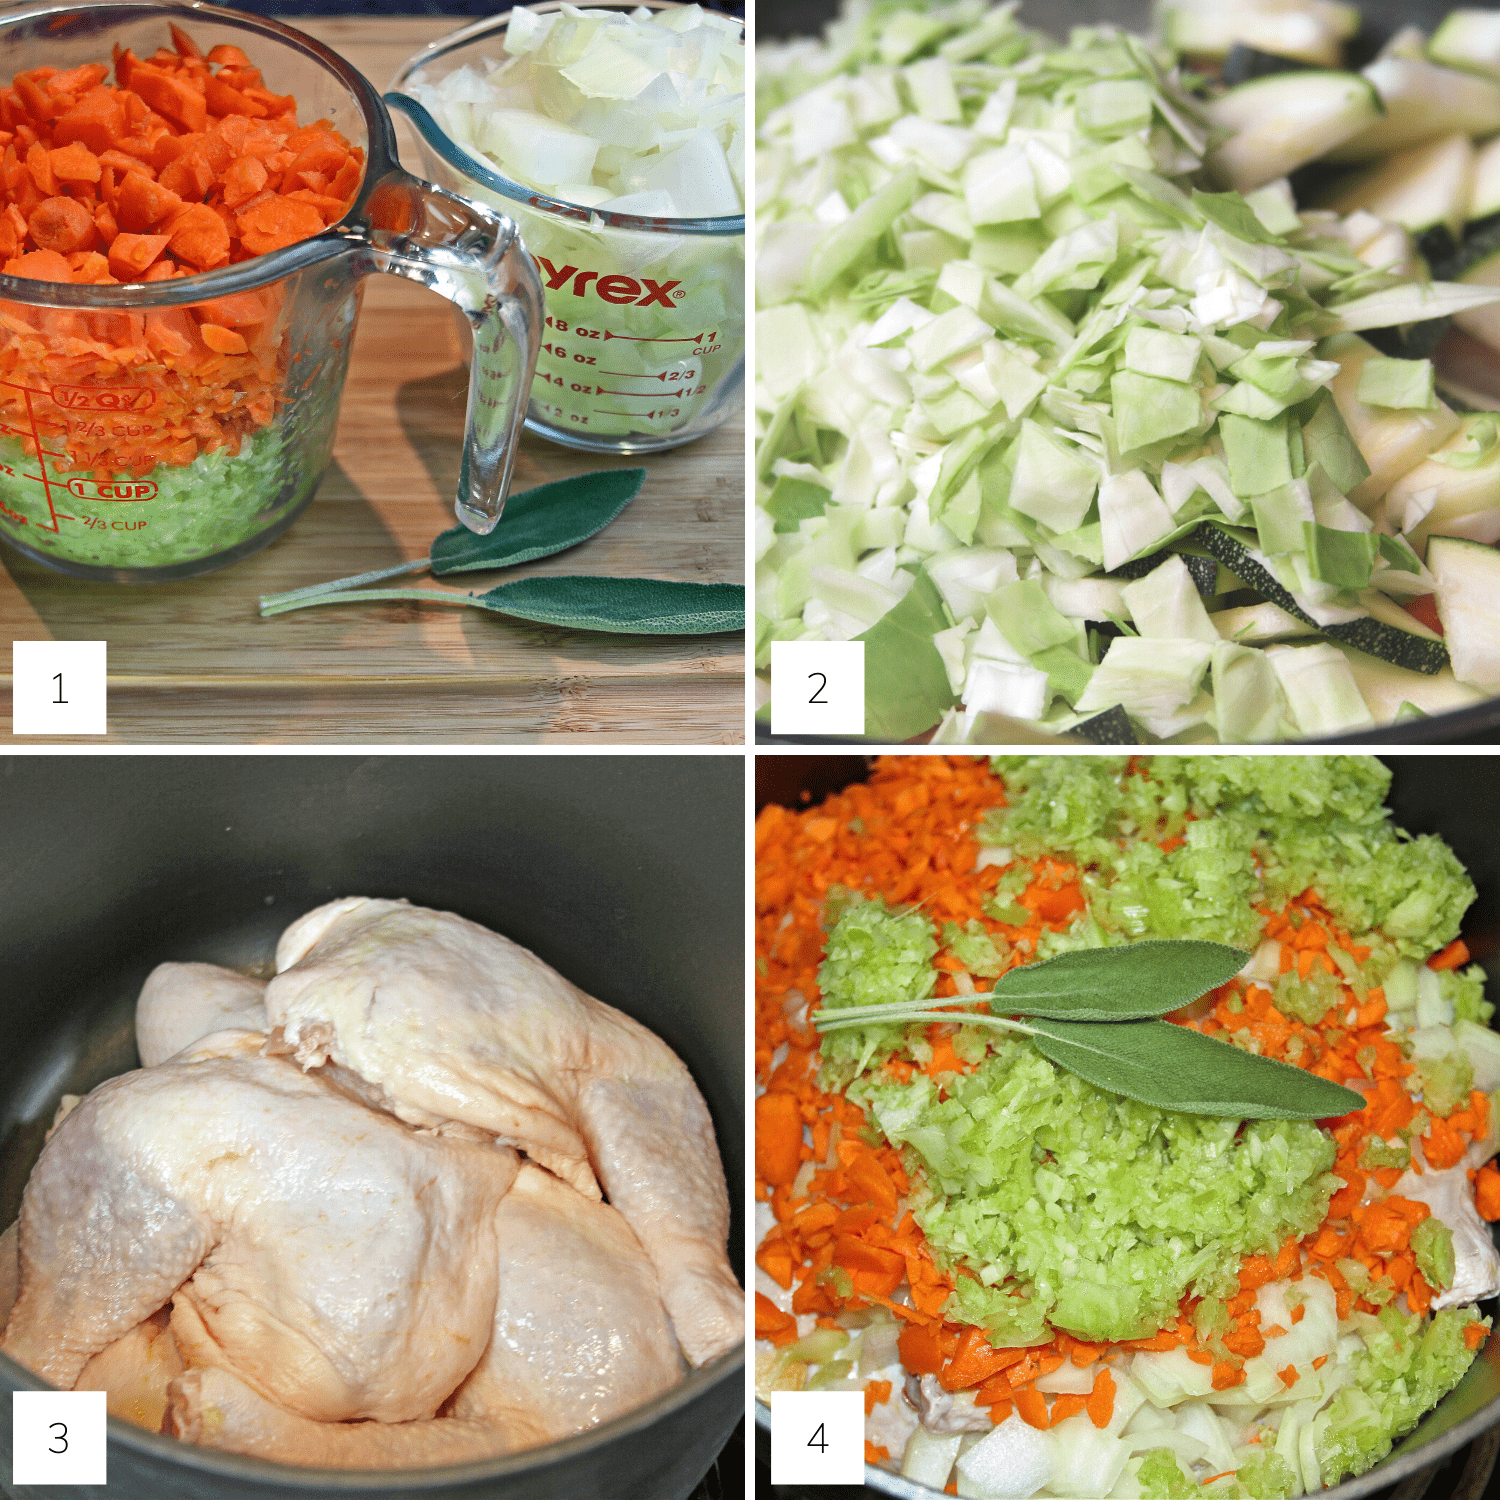 How to make homemade chicken broth